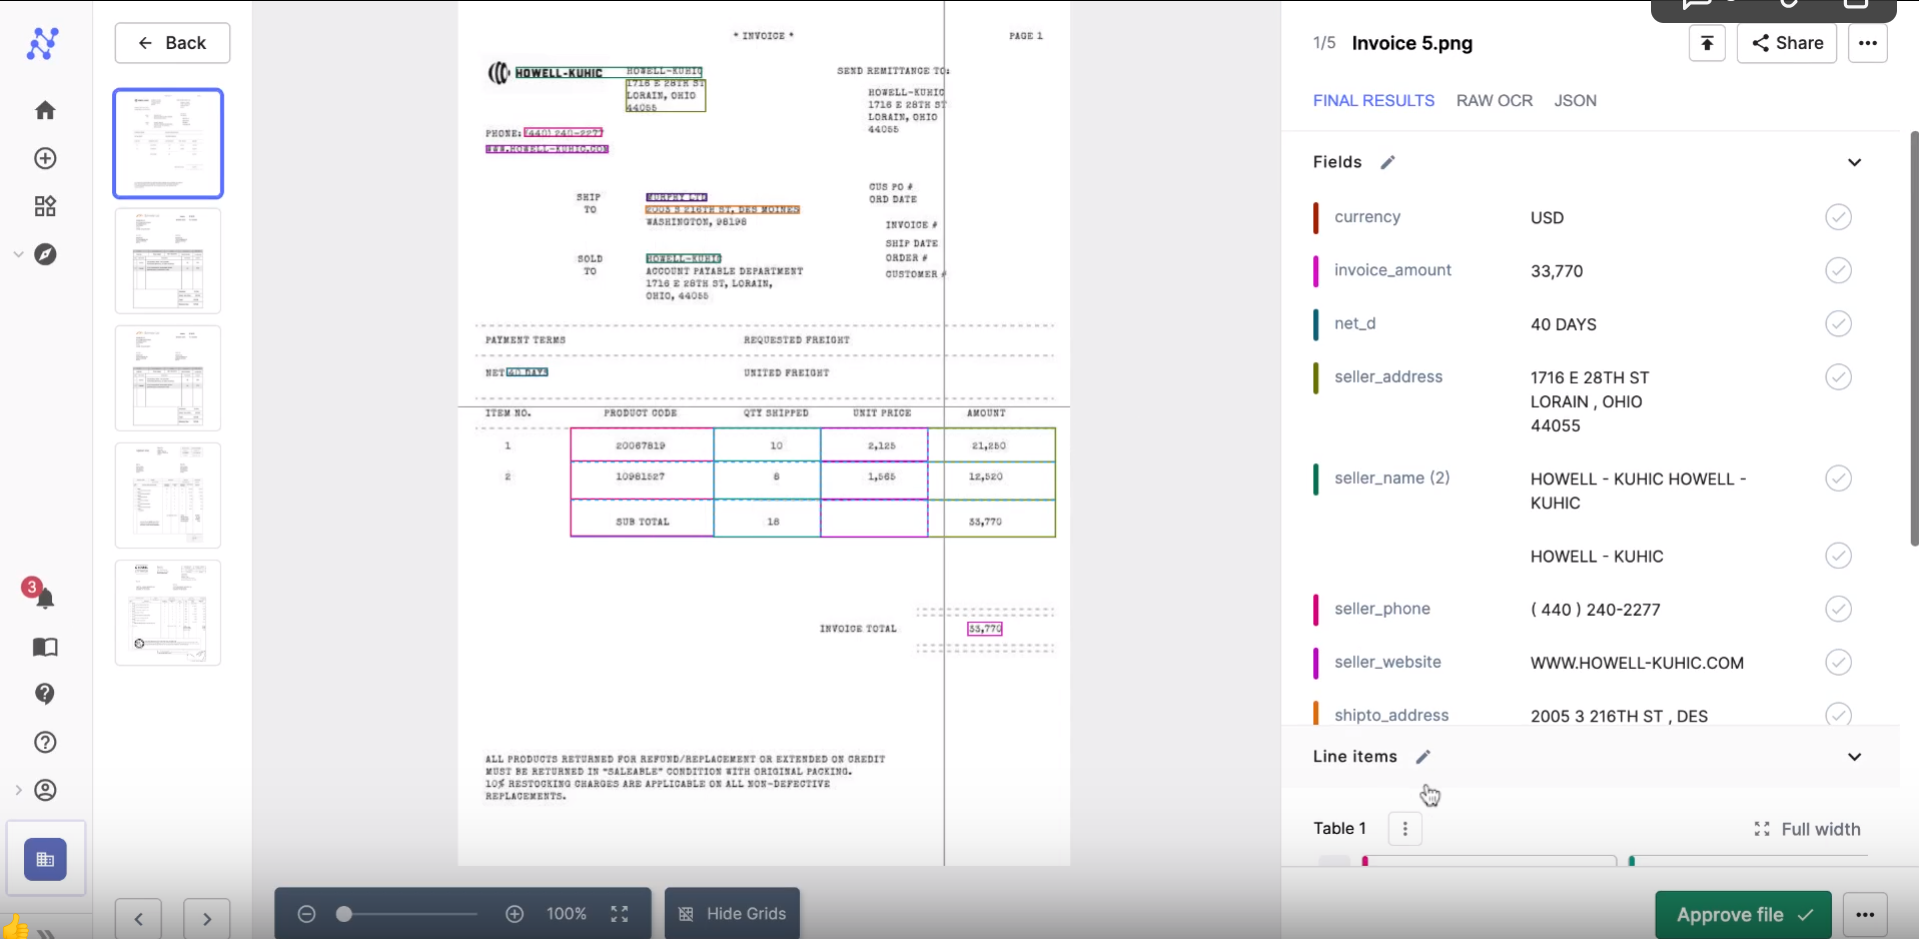 Here's an example of how Nanonets Invoice OCR works.